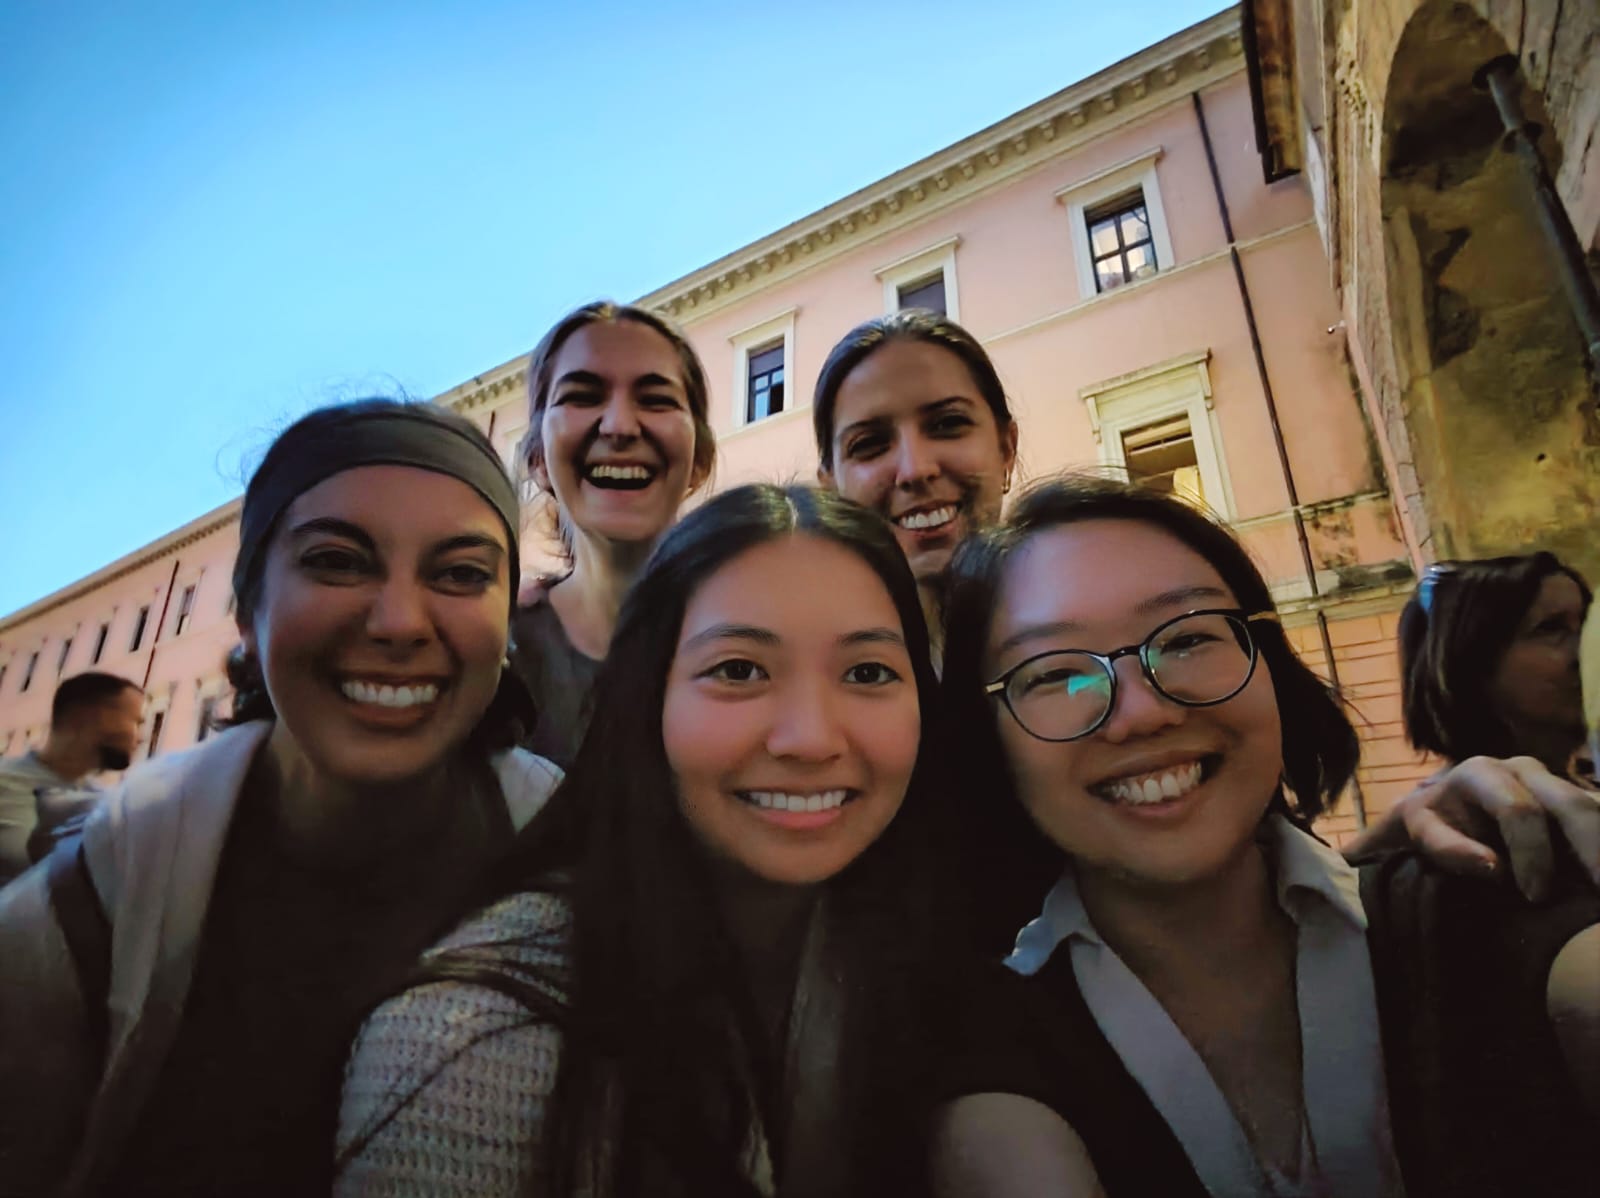 A week of fellowship, culture and spiritual enrichment in Rome